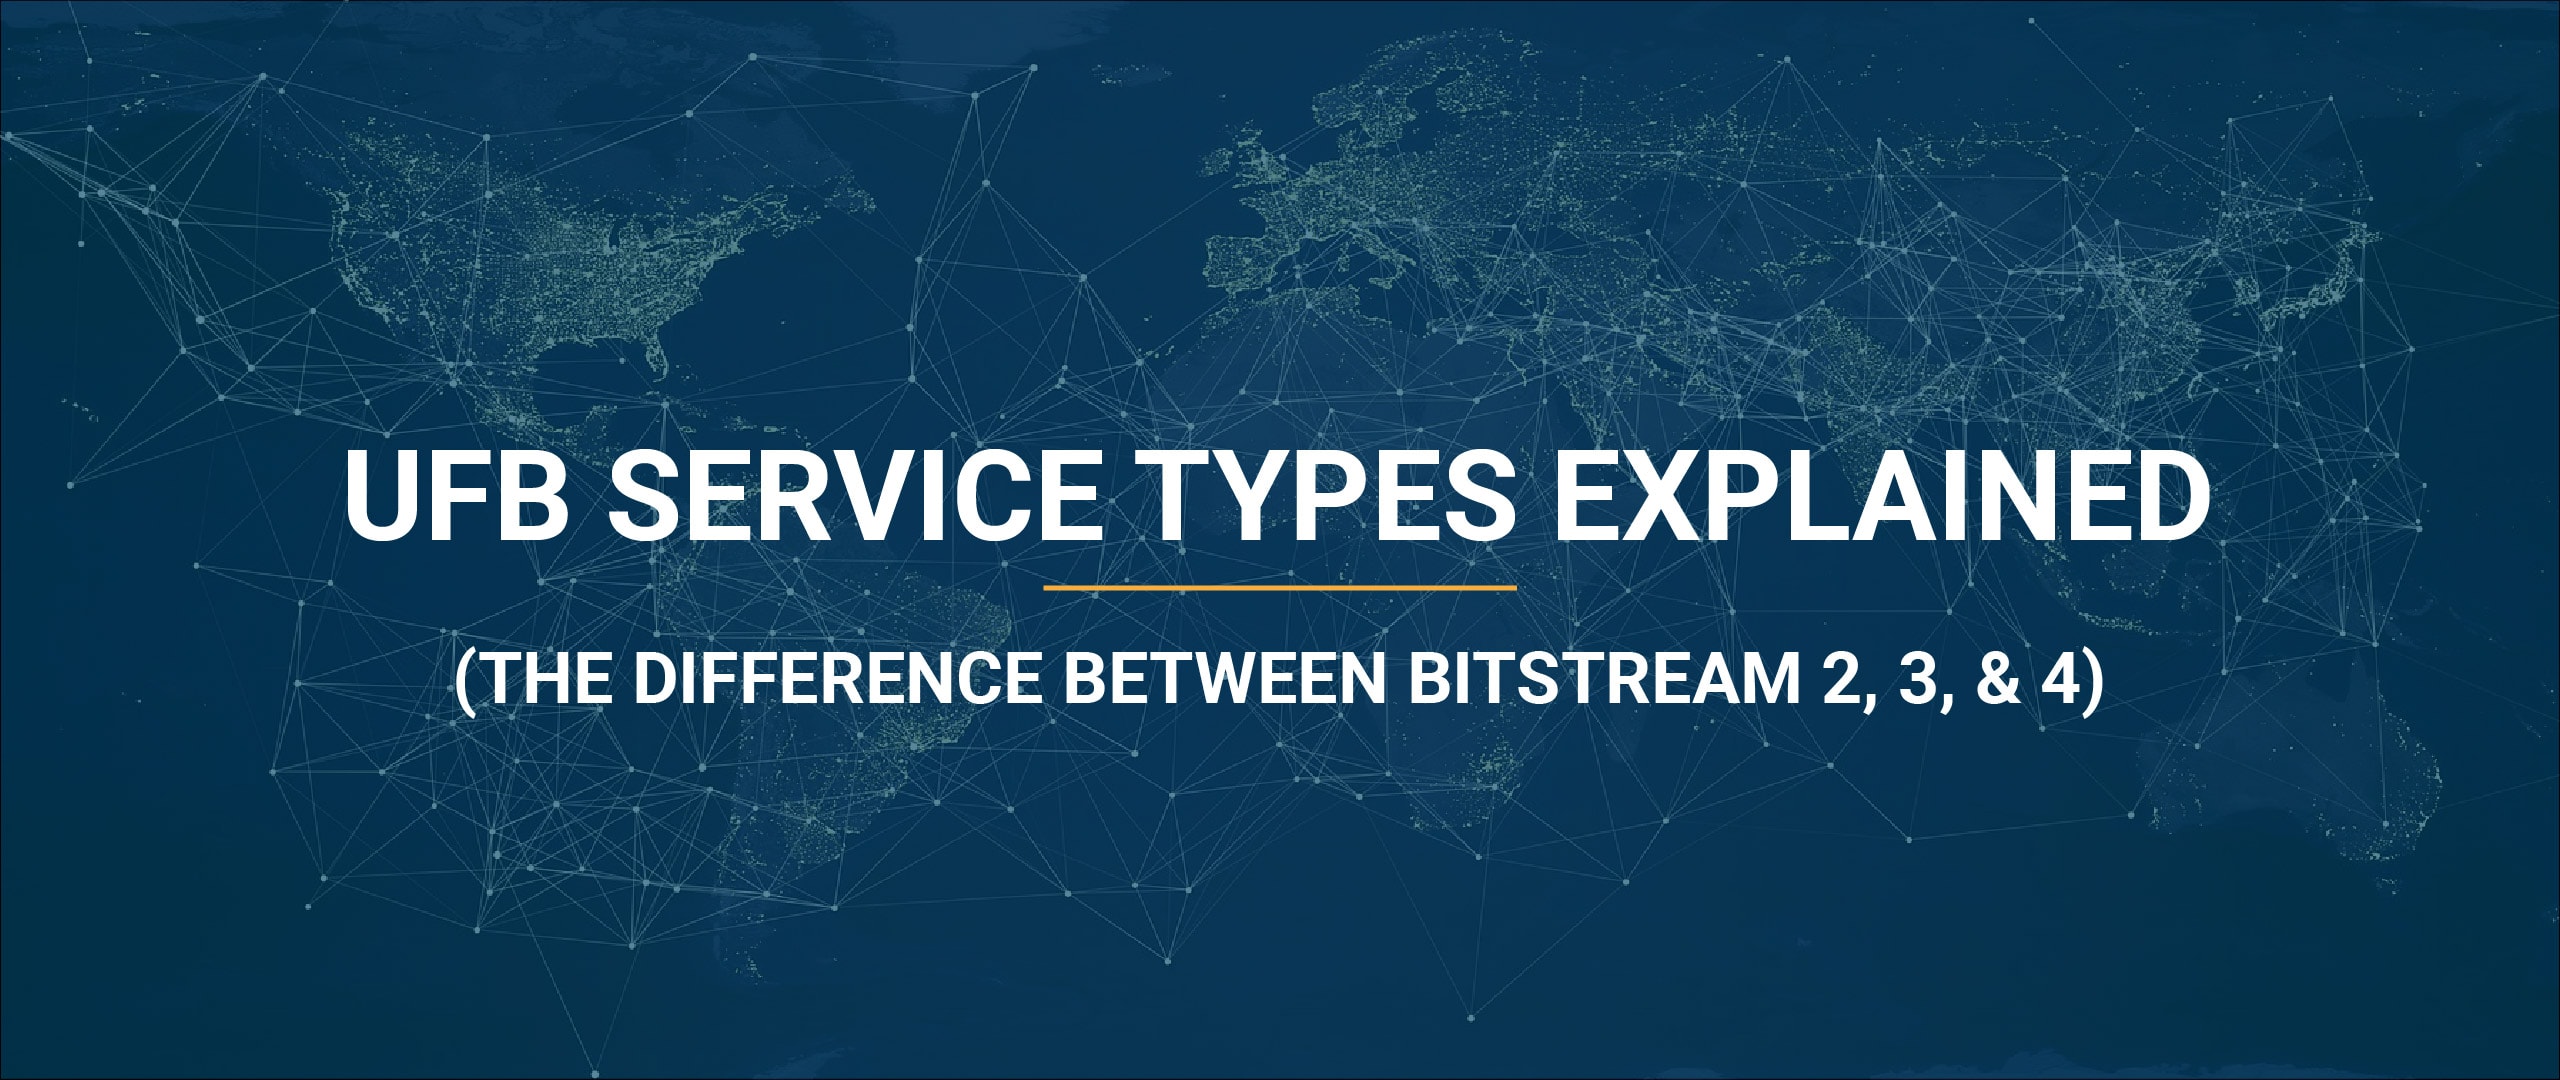 Different UFB service types explained